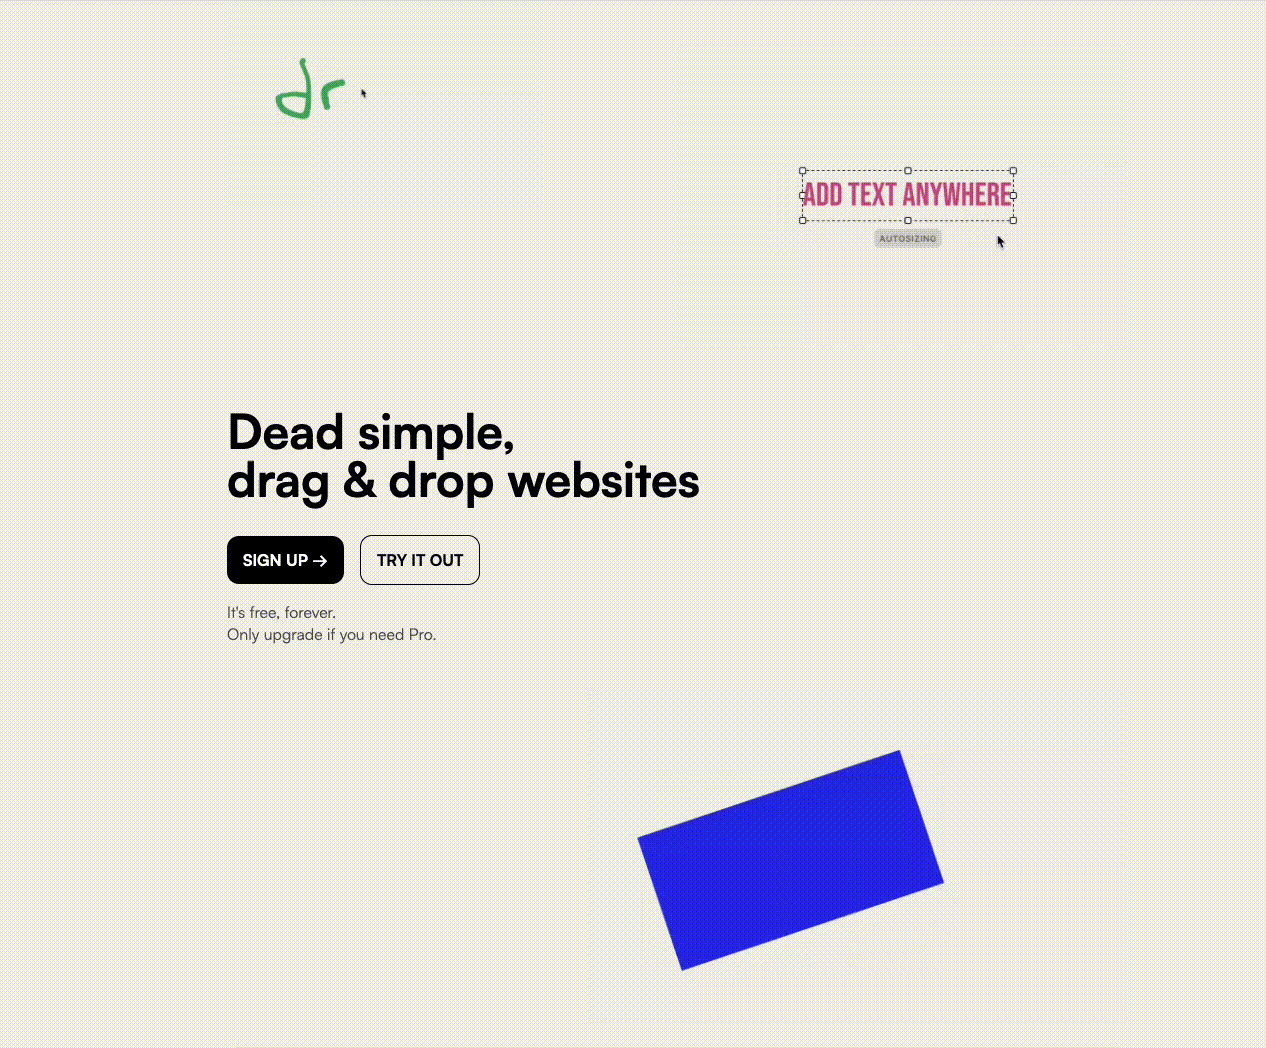 mmm&rsquo;s landing page showcases the quirky ways to make a website.